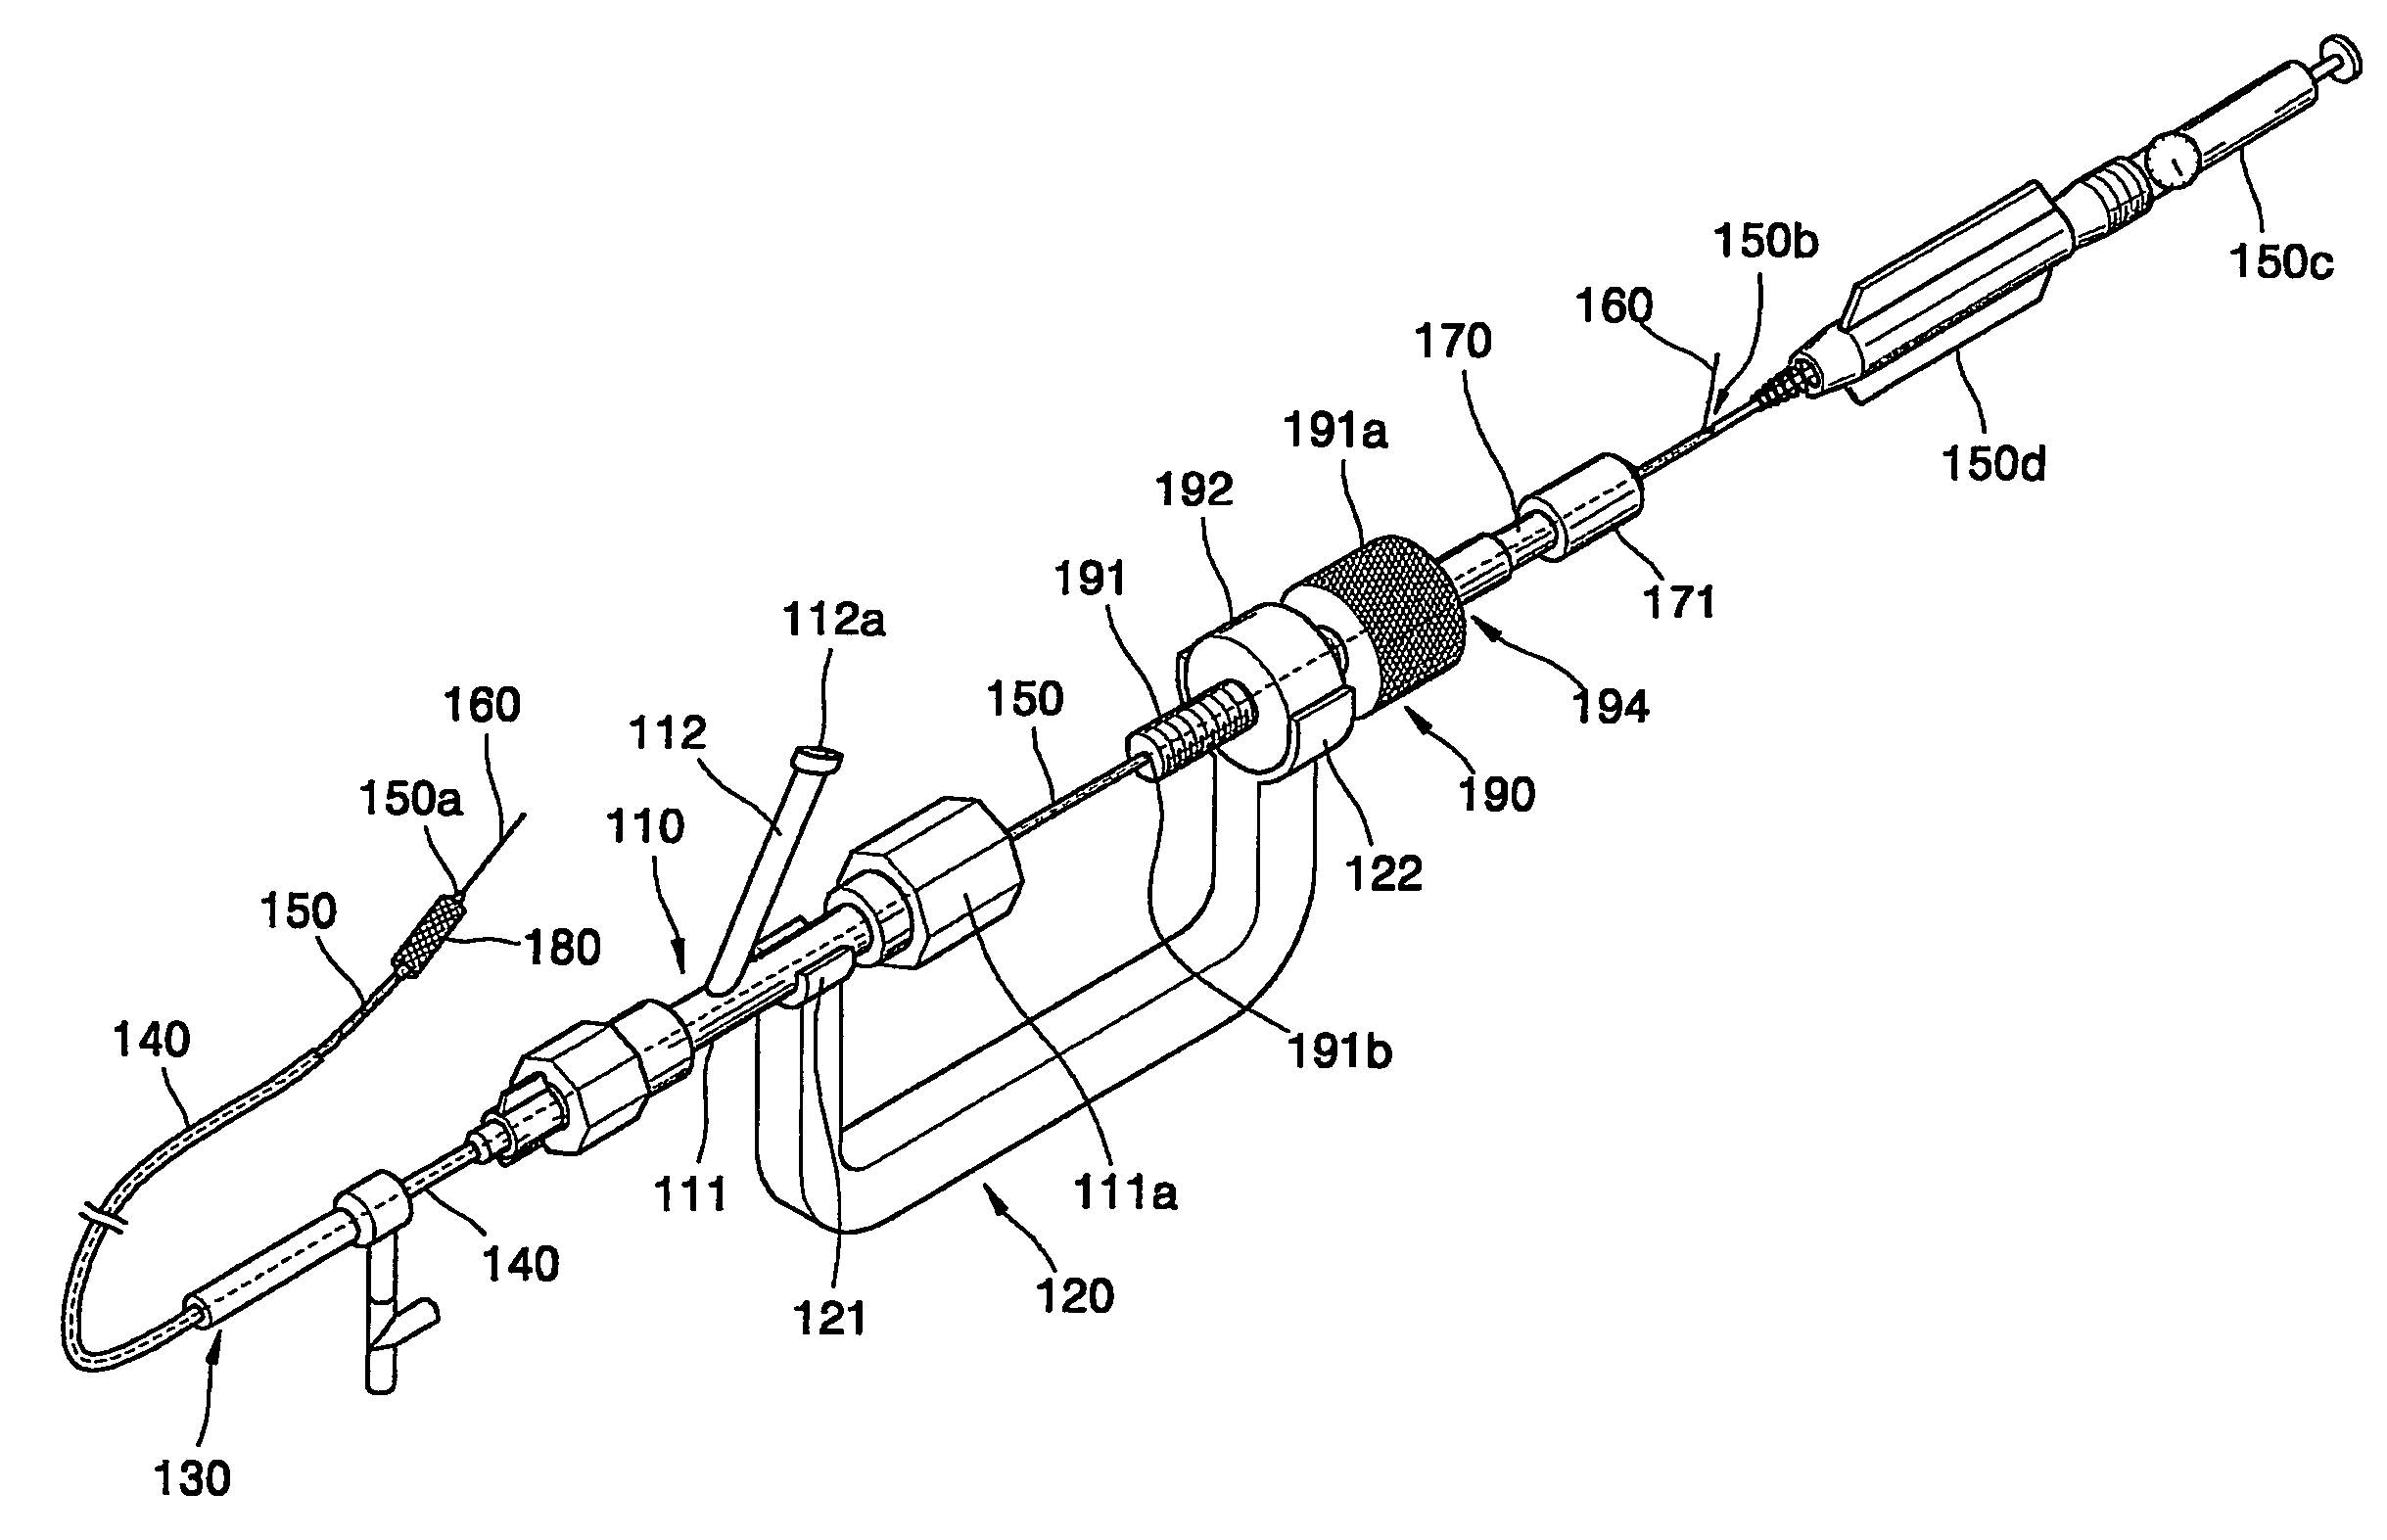 Catheter apparatus for percutaneous coronary intervention capable of accurately positioning stent and balloon in a desired position